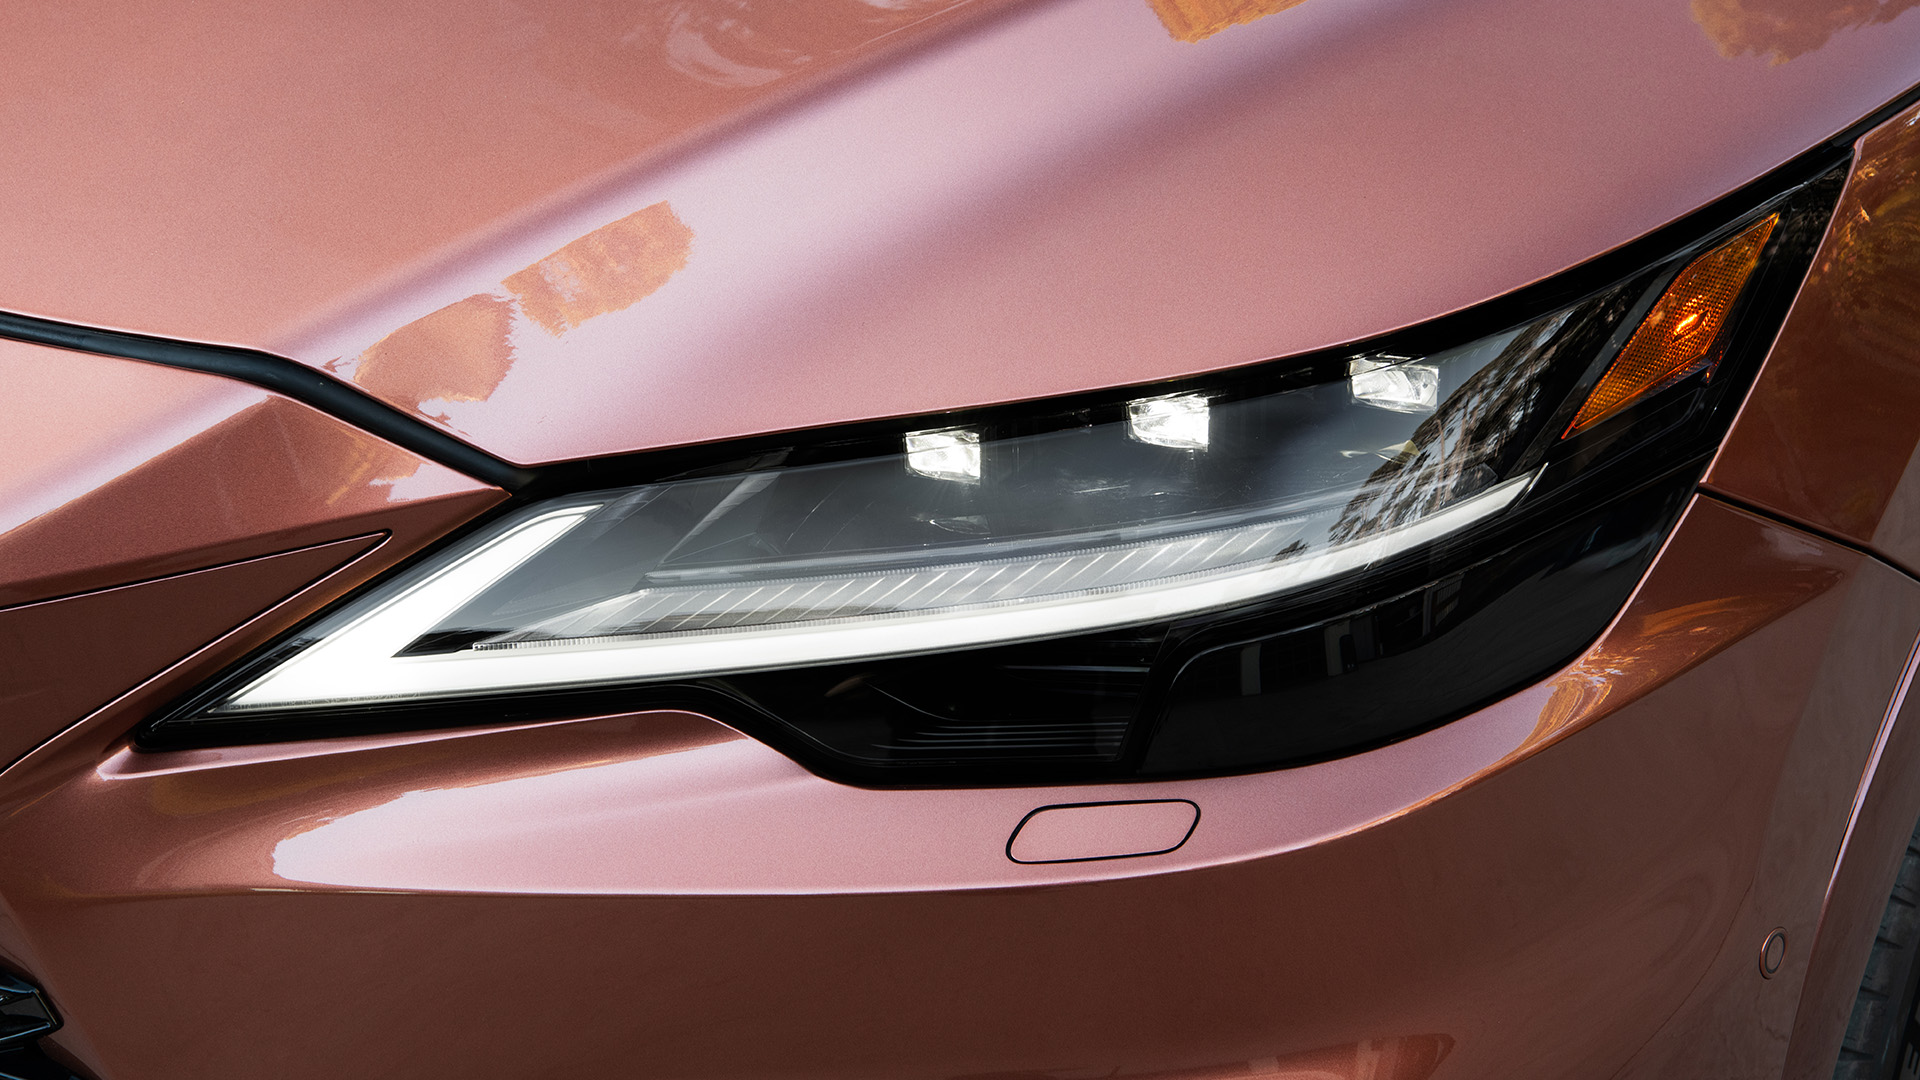 A close up on the headlight of a copper colored RX.